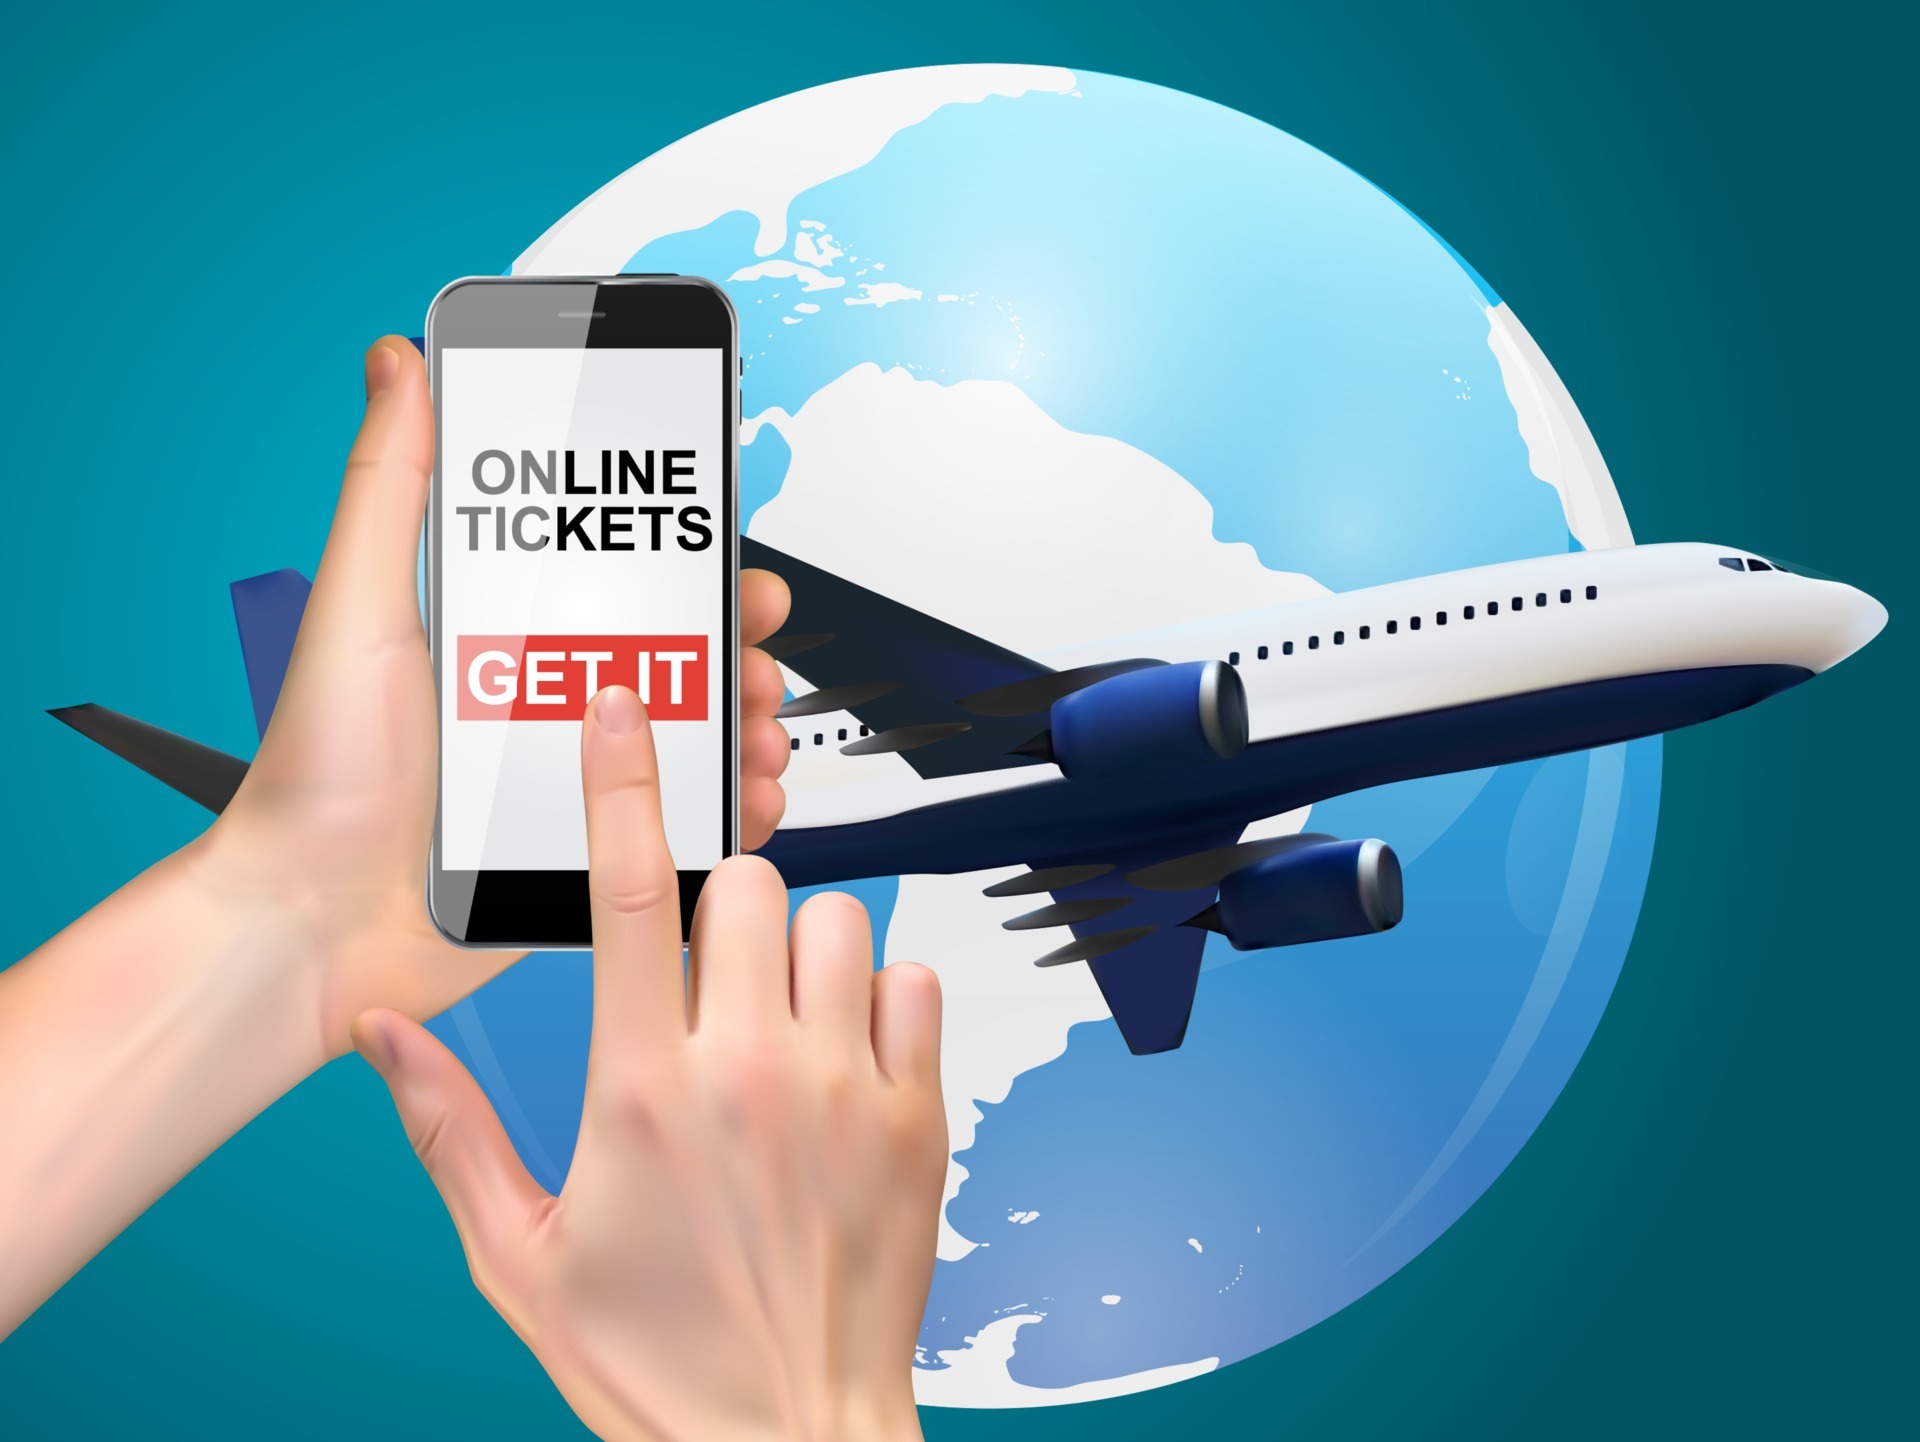 hand holding a mobile phone buy air tickets online concept illustration free vector fe914